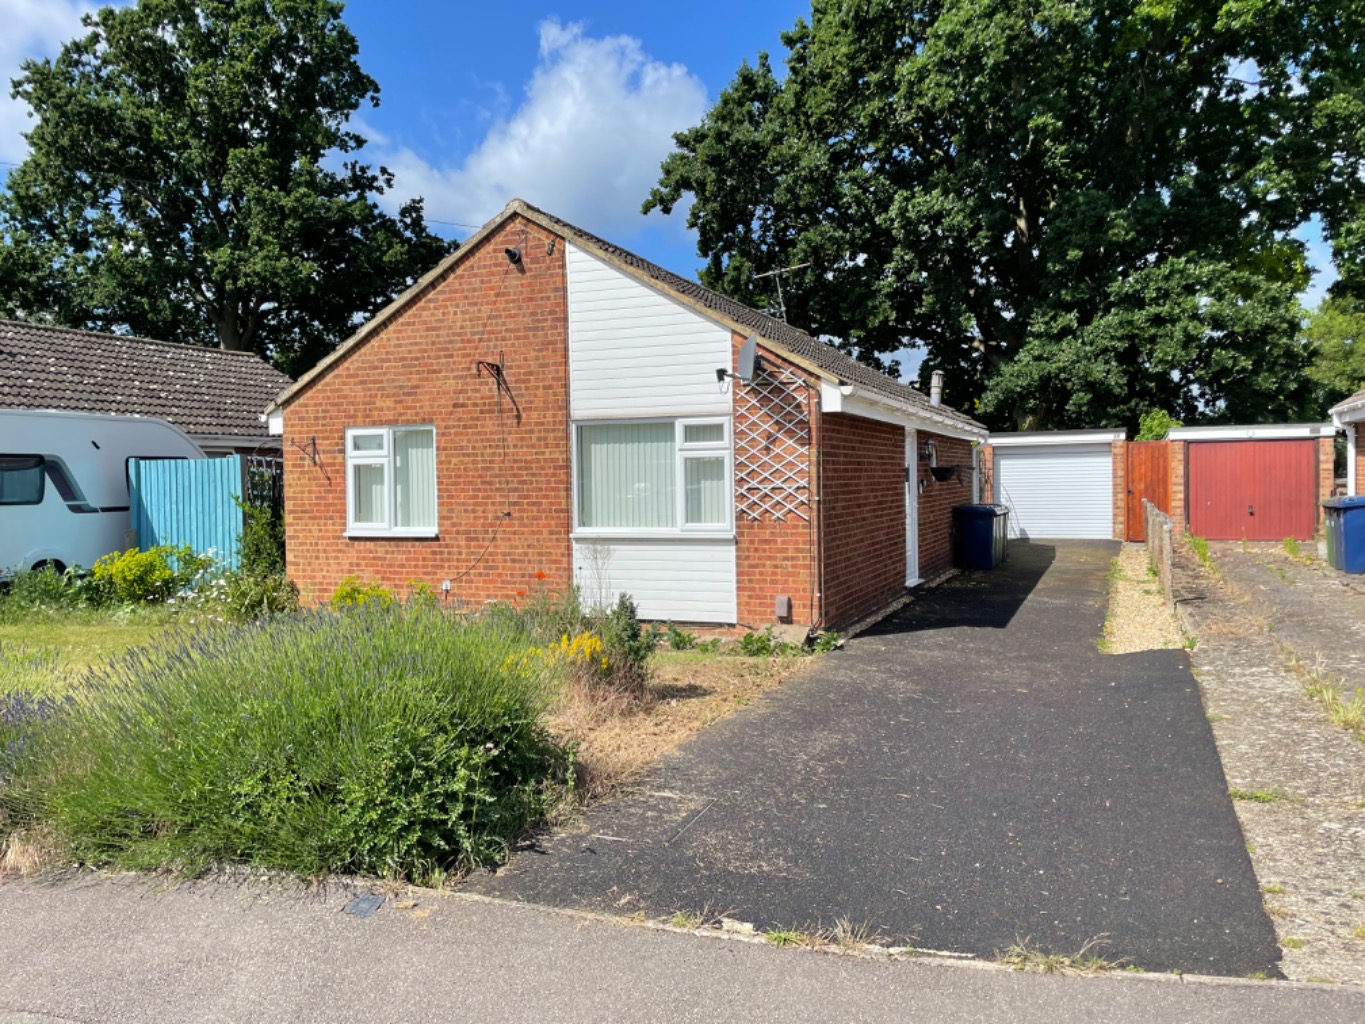 2 bed bungalow for sale in Boardman Close, St. Neots, PE19